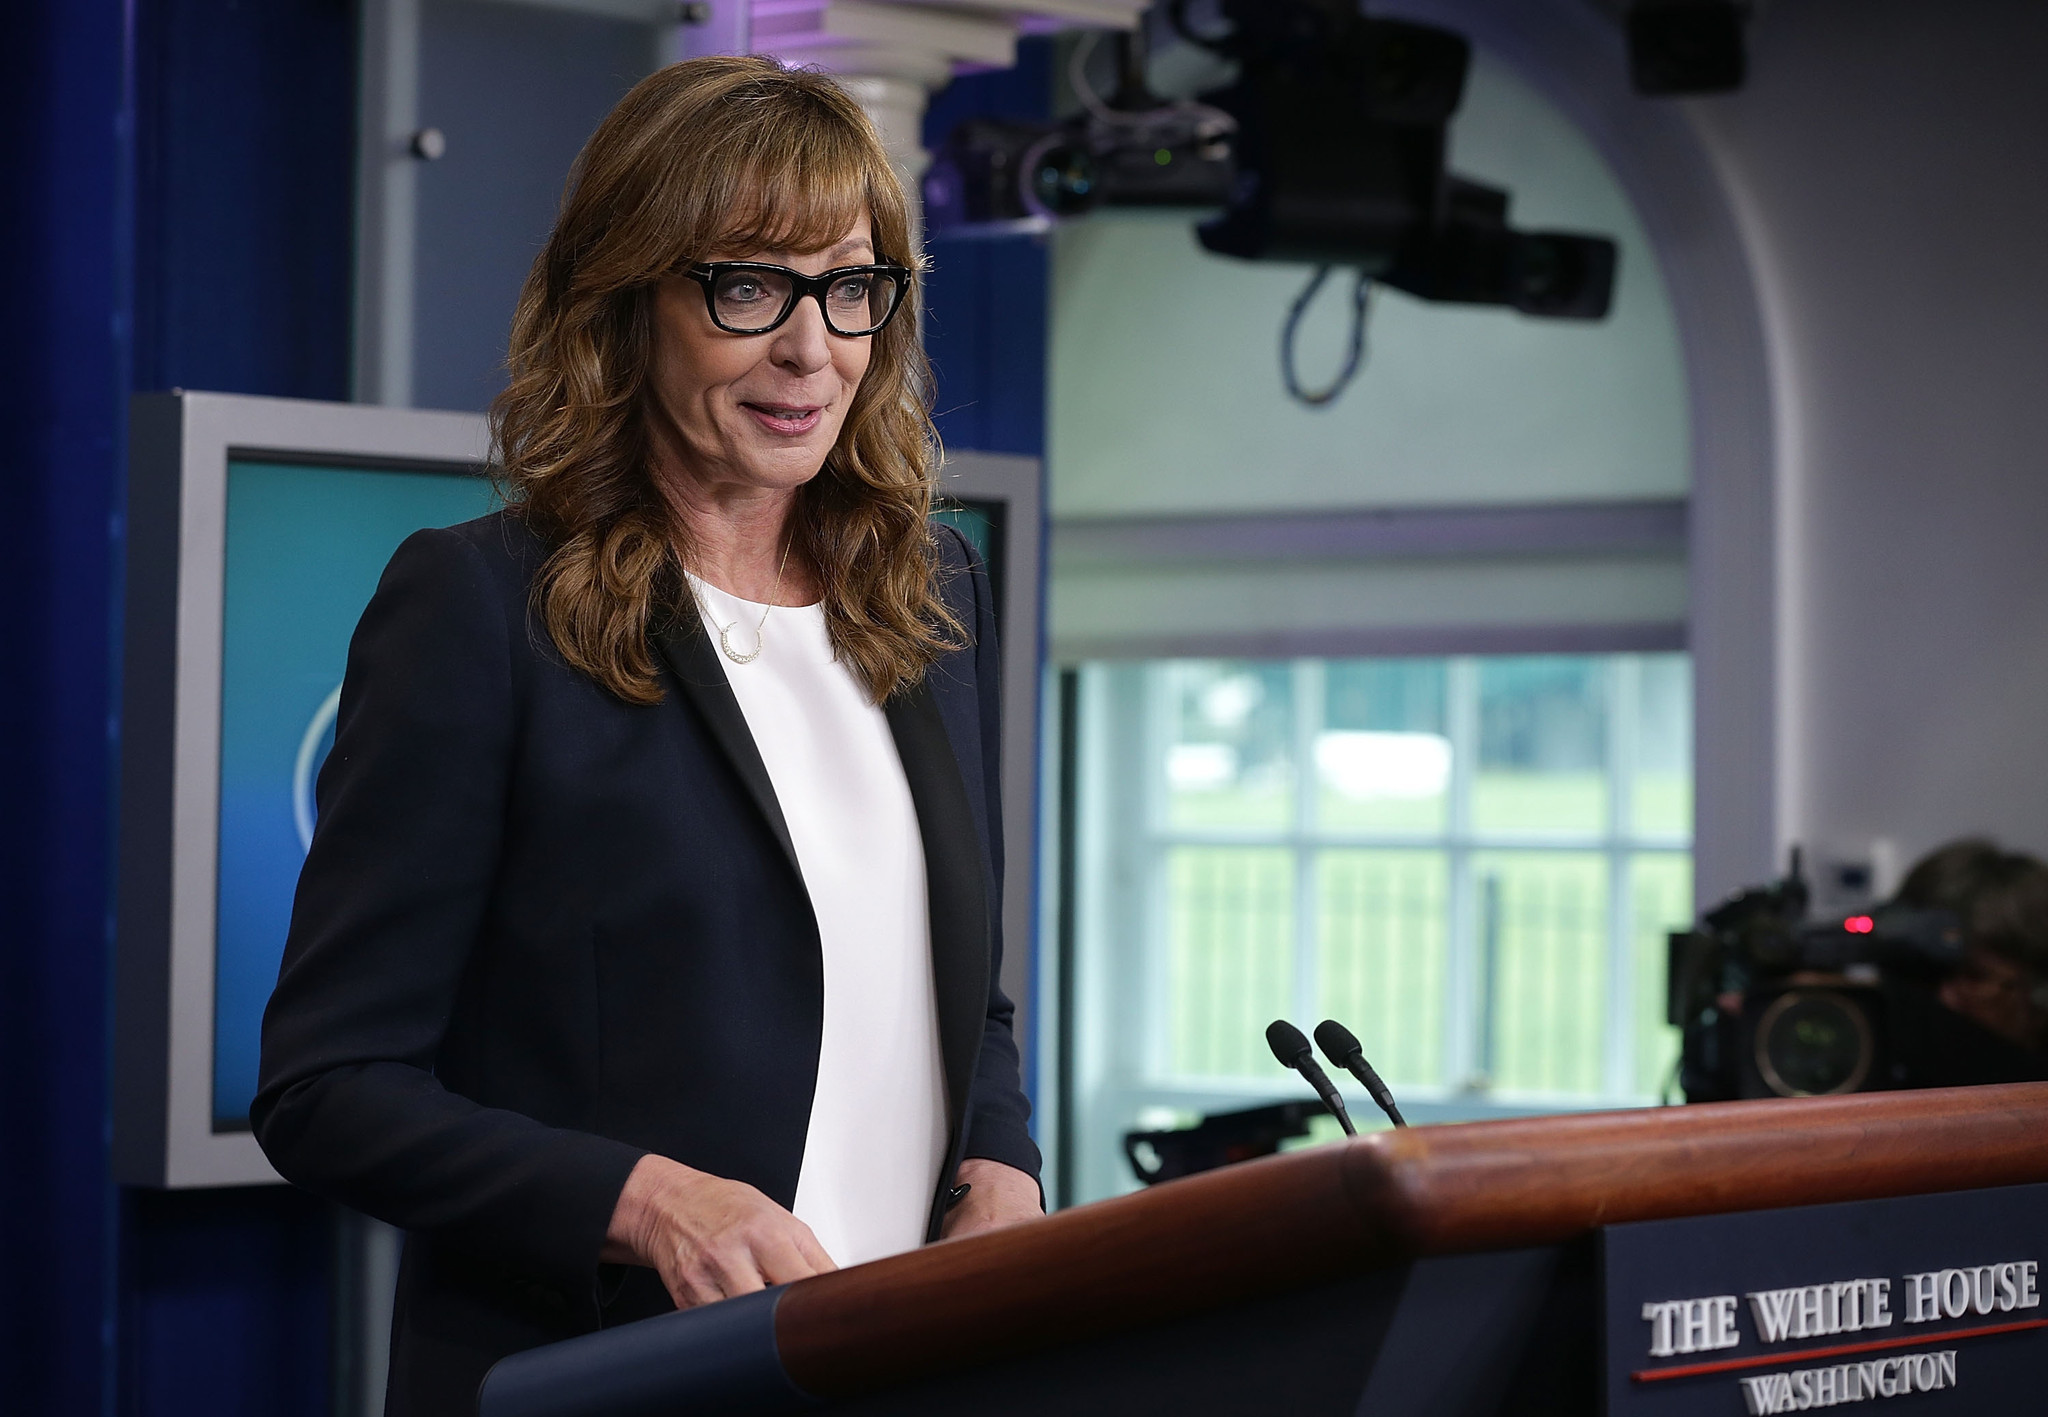 Allison Janney surprises White House pressroom with briefing as 'The West Wing's' C.J ...2048 x 1417